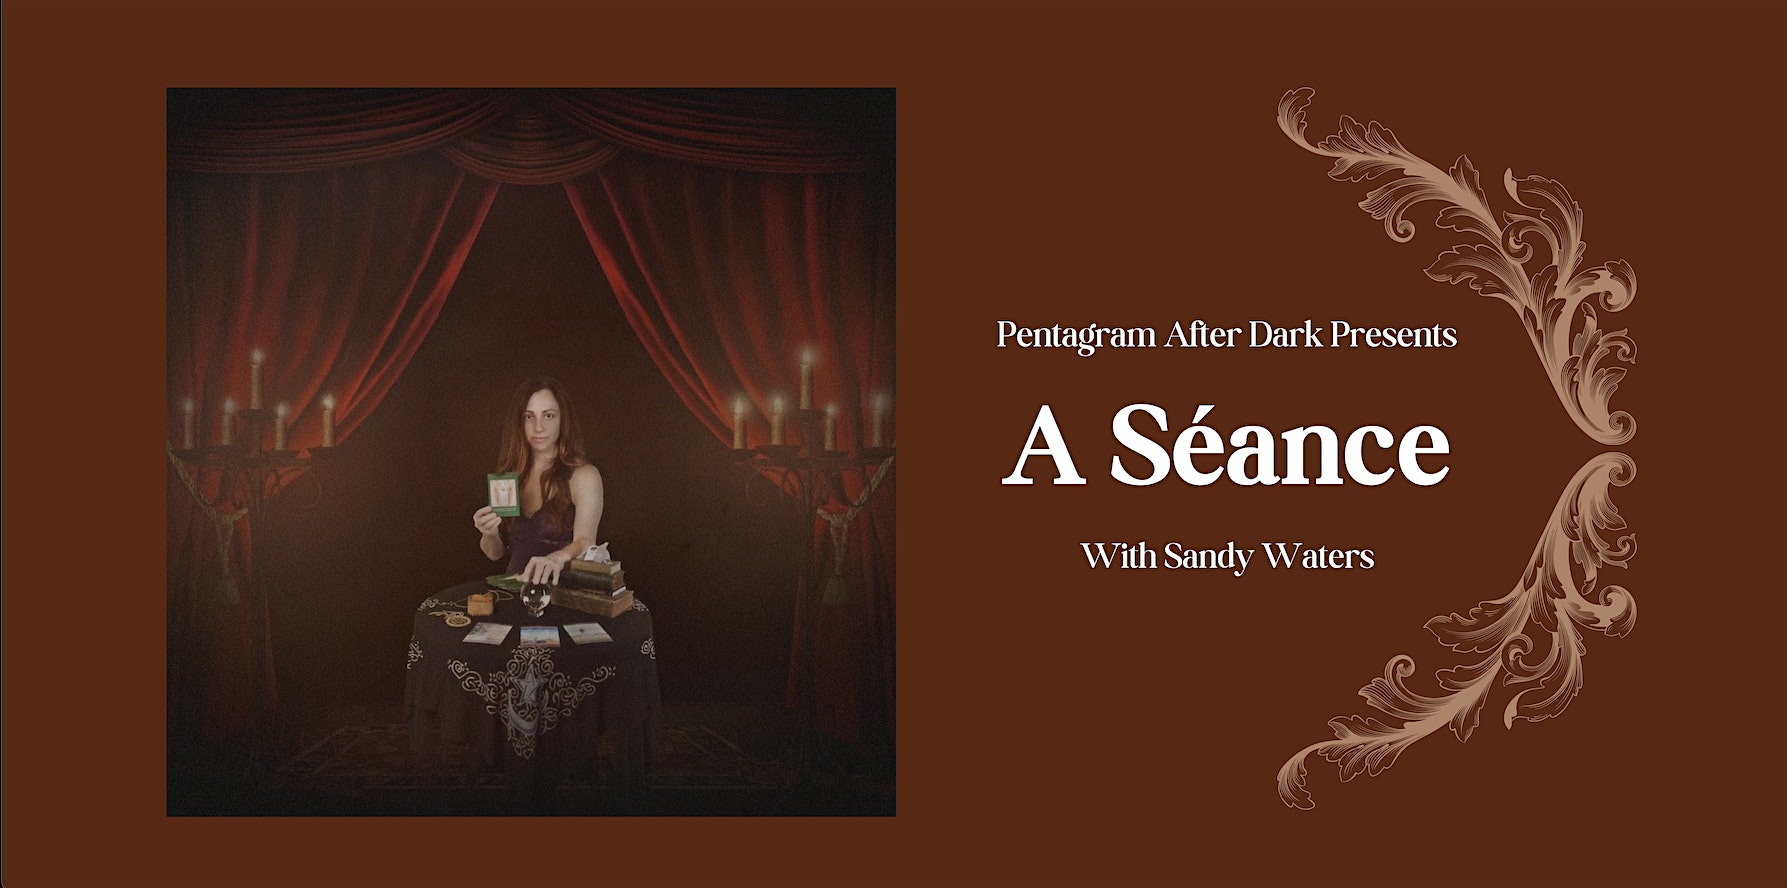 Join us for "A Séance with Sandy Waters" event hosted by Pentagram After Dark. The captivating image shows a woman seated at a table, surrounded by an enchanting ambiance, preparing to delve into the world of the unknown. Don't miss this mystic experience!